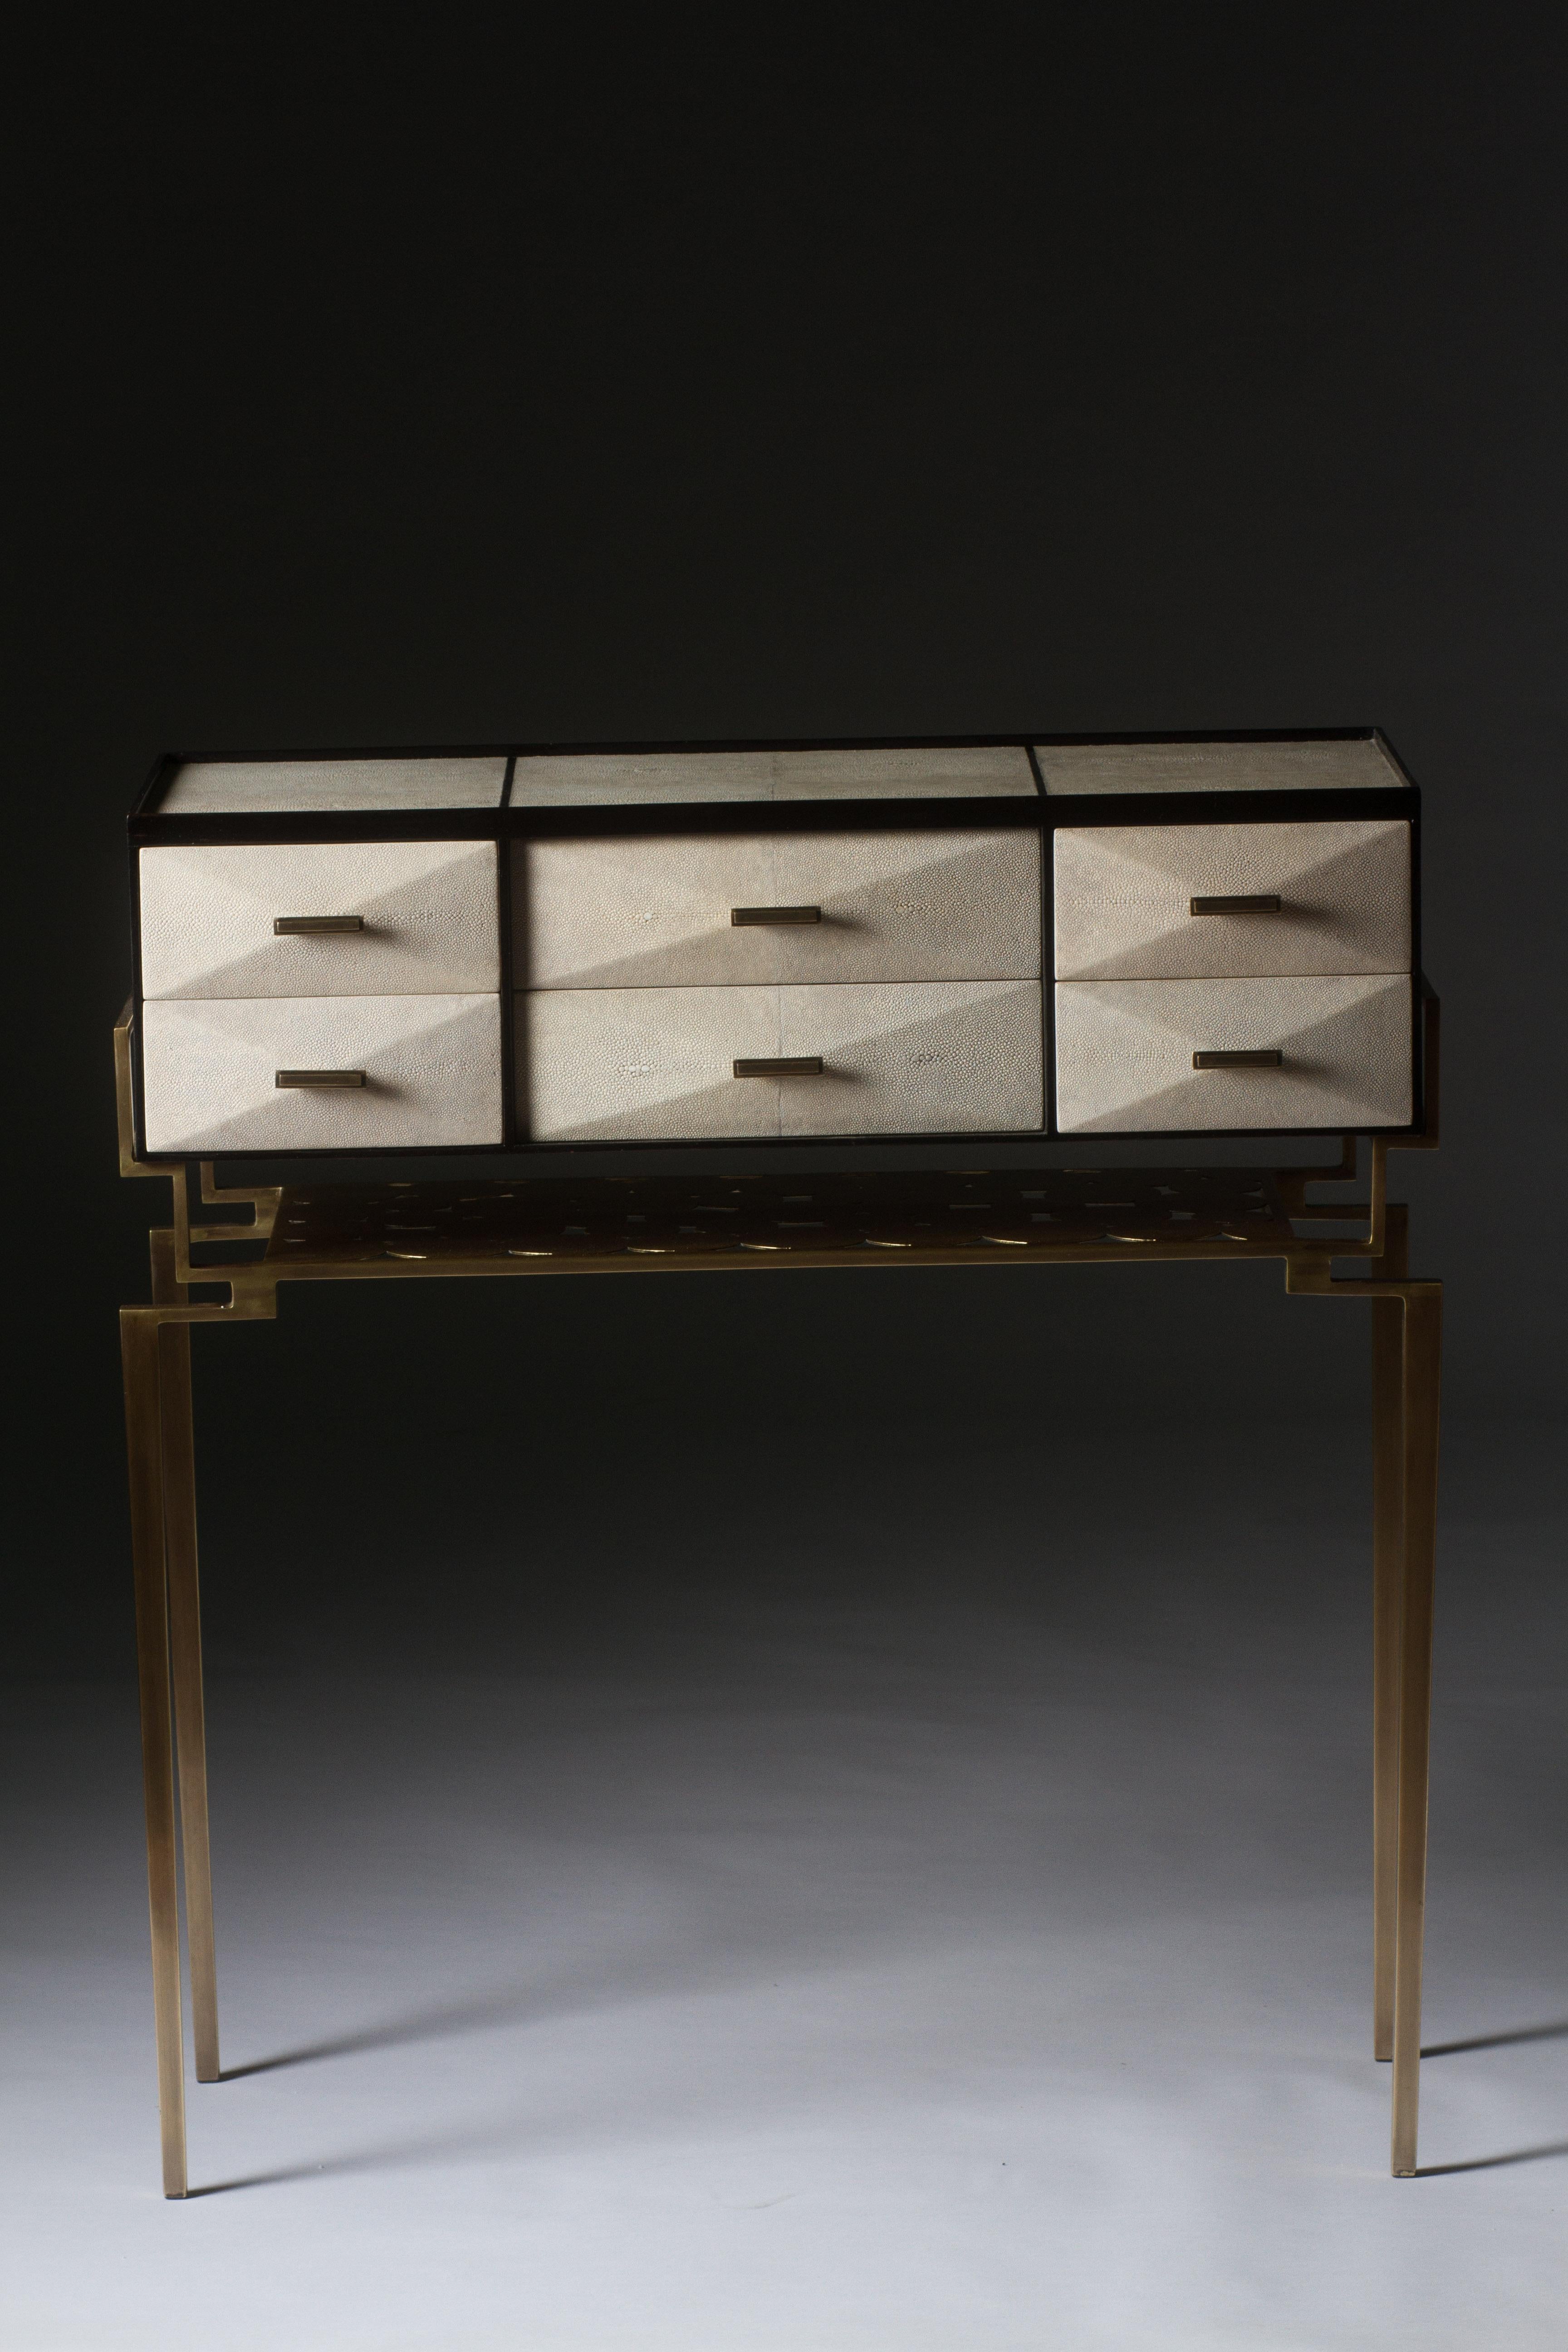 The Cosima 7 console, is both practical and stunning in design. This smaller console includes 6 beveled geometric drawers that can used to store anything from jewelry to stationary. This piece includes a bronze-patina brass shelf below the drawers